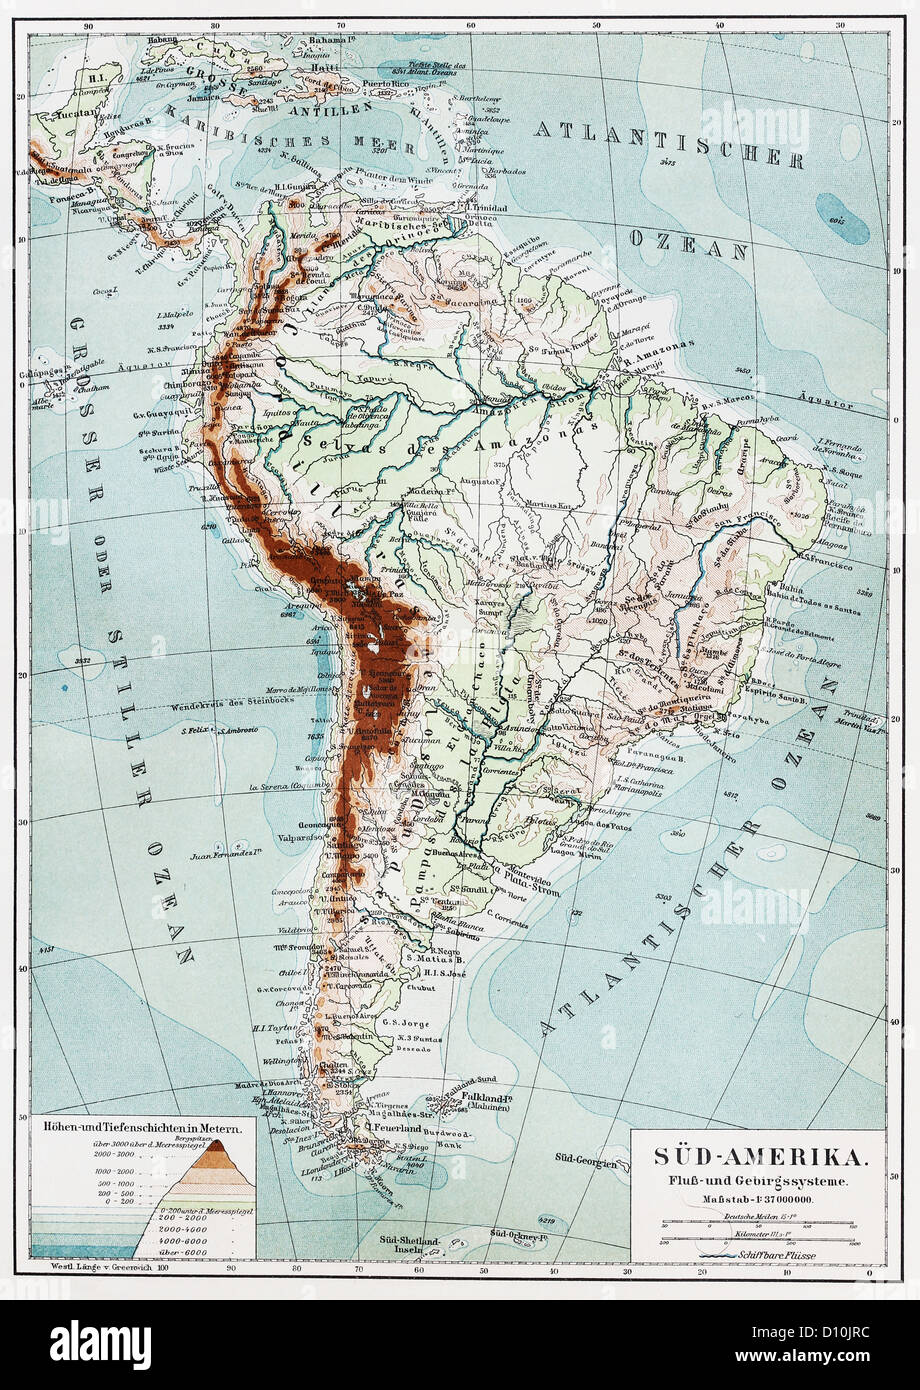 Vintage Map Of South America Rivers And Mountains System - 